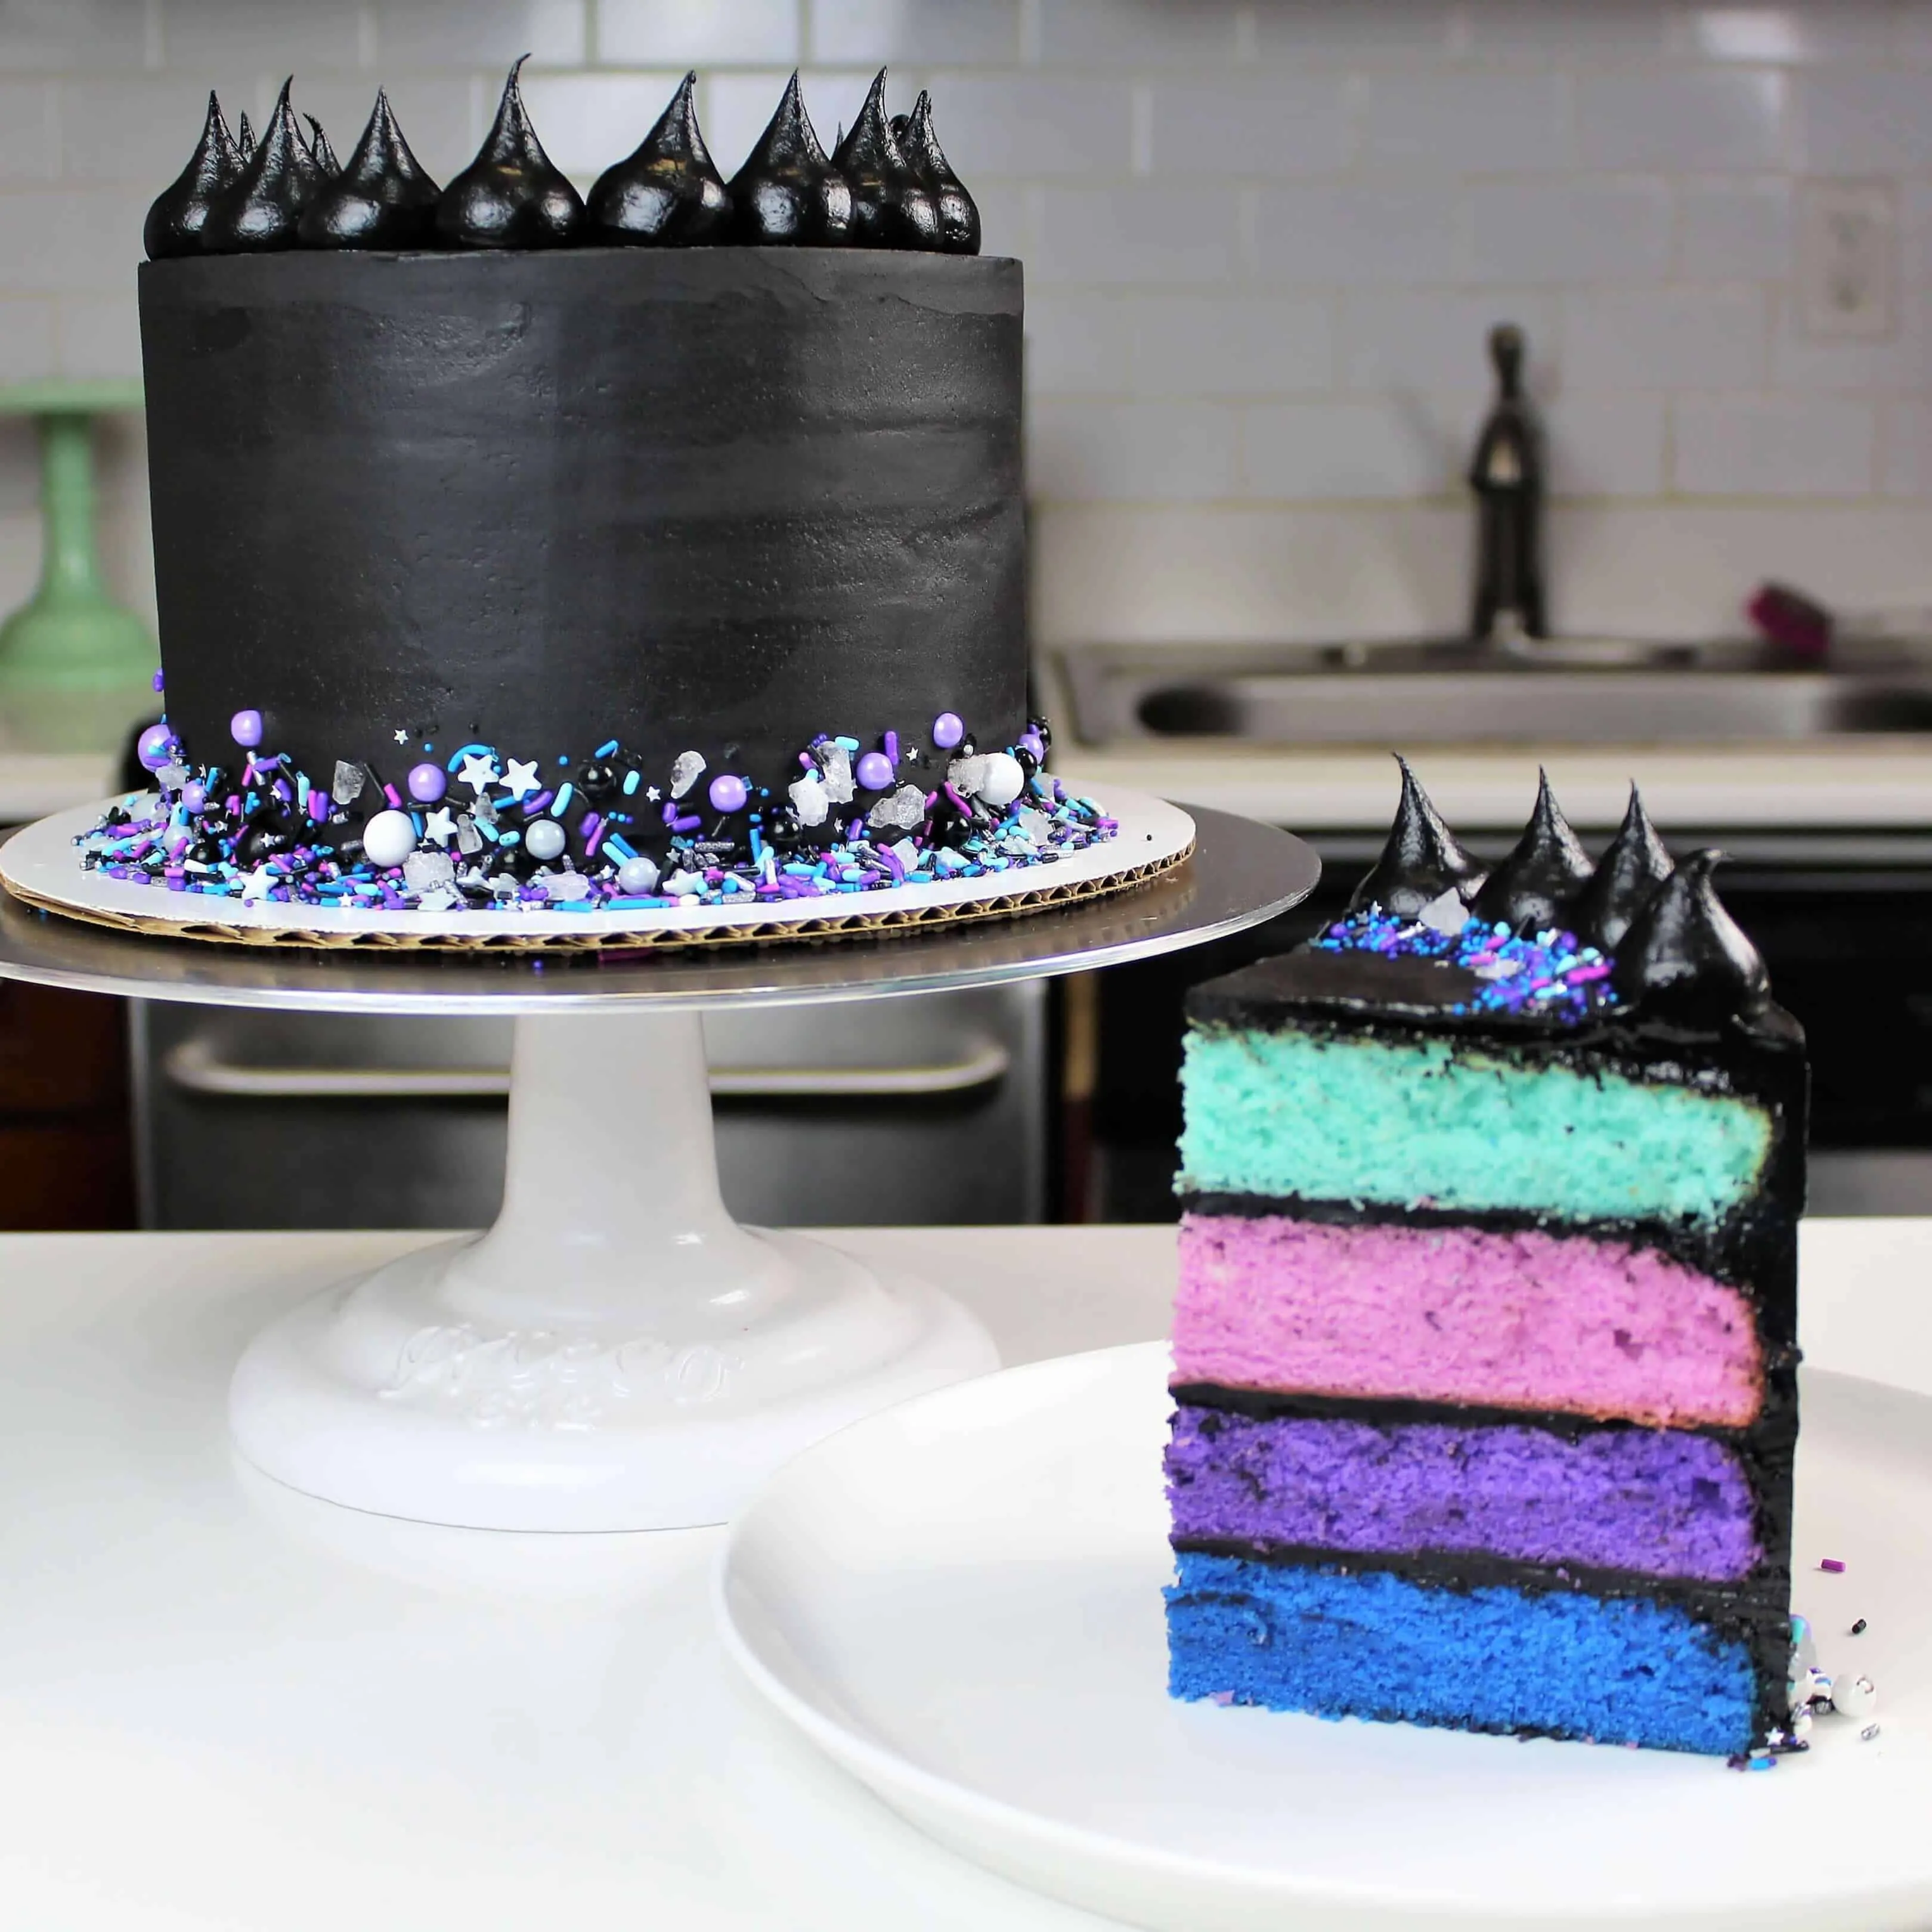 Galaxy themed cake frosted with black buttercream